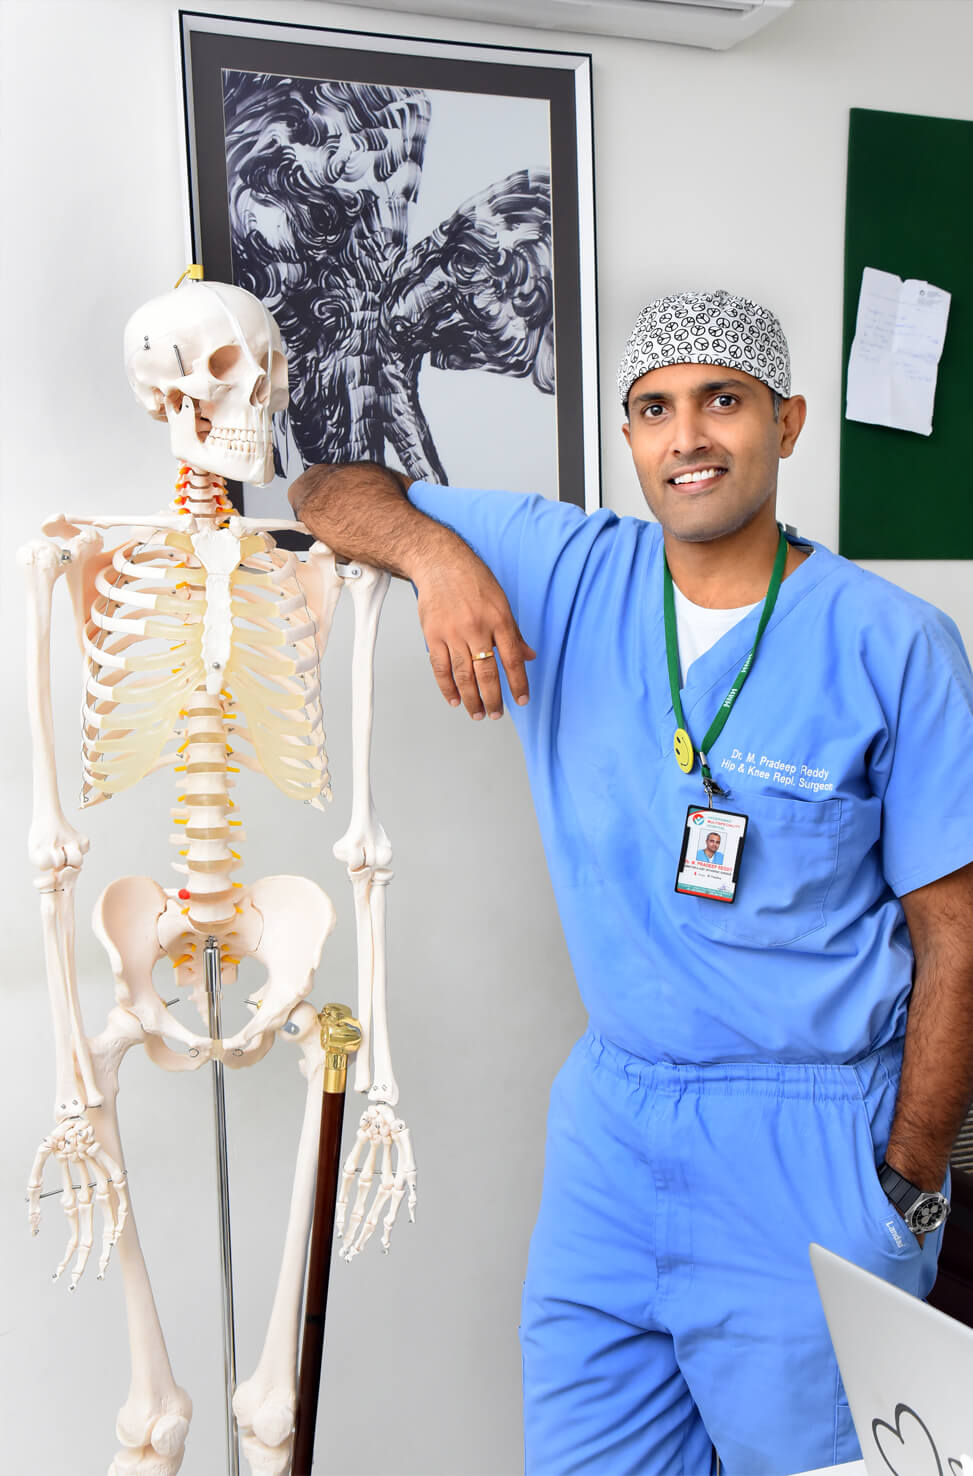 Dr Pradeep Reddy M, As a Student, Orthopedic Surgeon, Knee Joint Replacement Surgeon